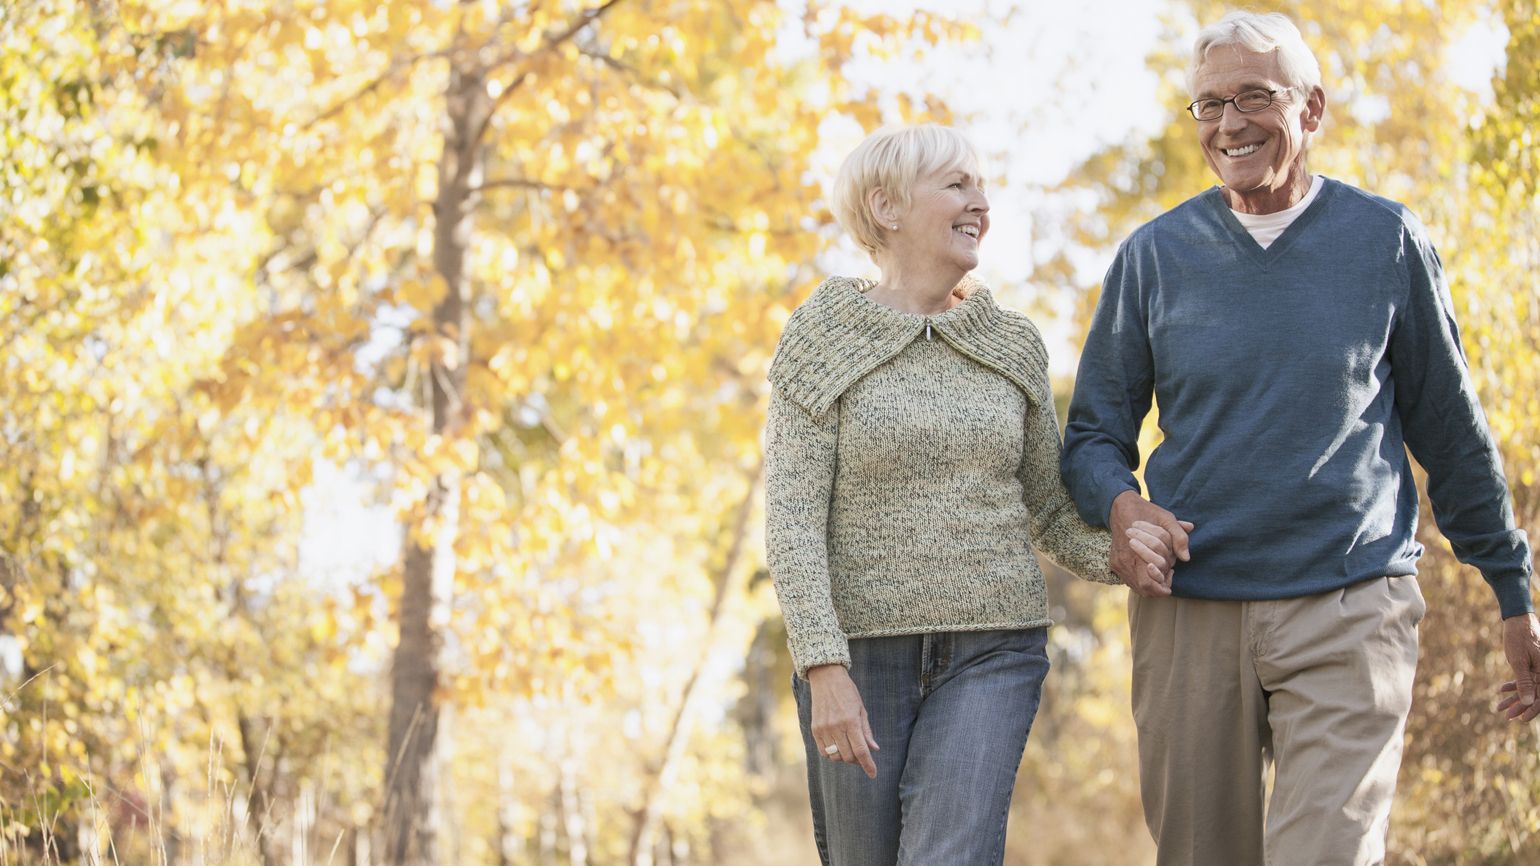 The Power of Love: An elderly couple holding hands during the Autumn season. Mysterious Ways Editors Share what makes them feel awe inspiration miracles gods grace